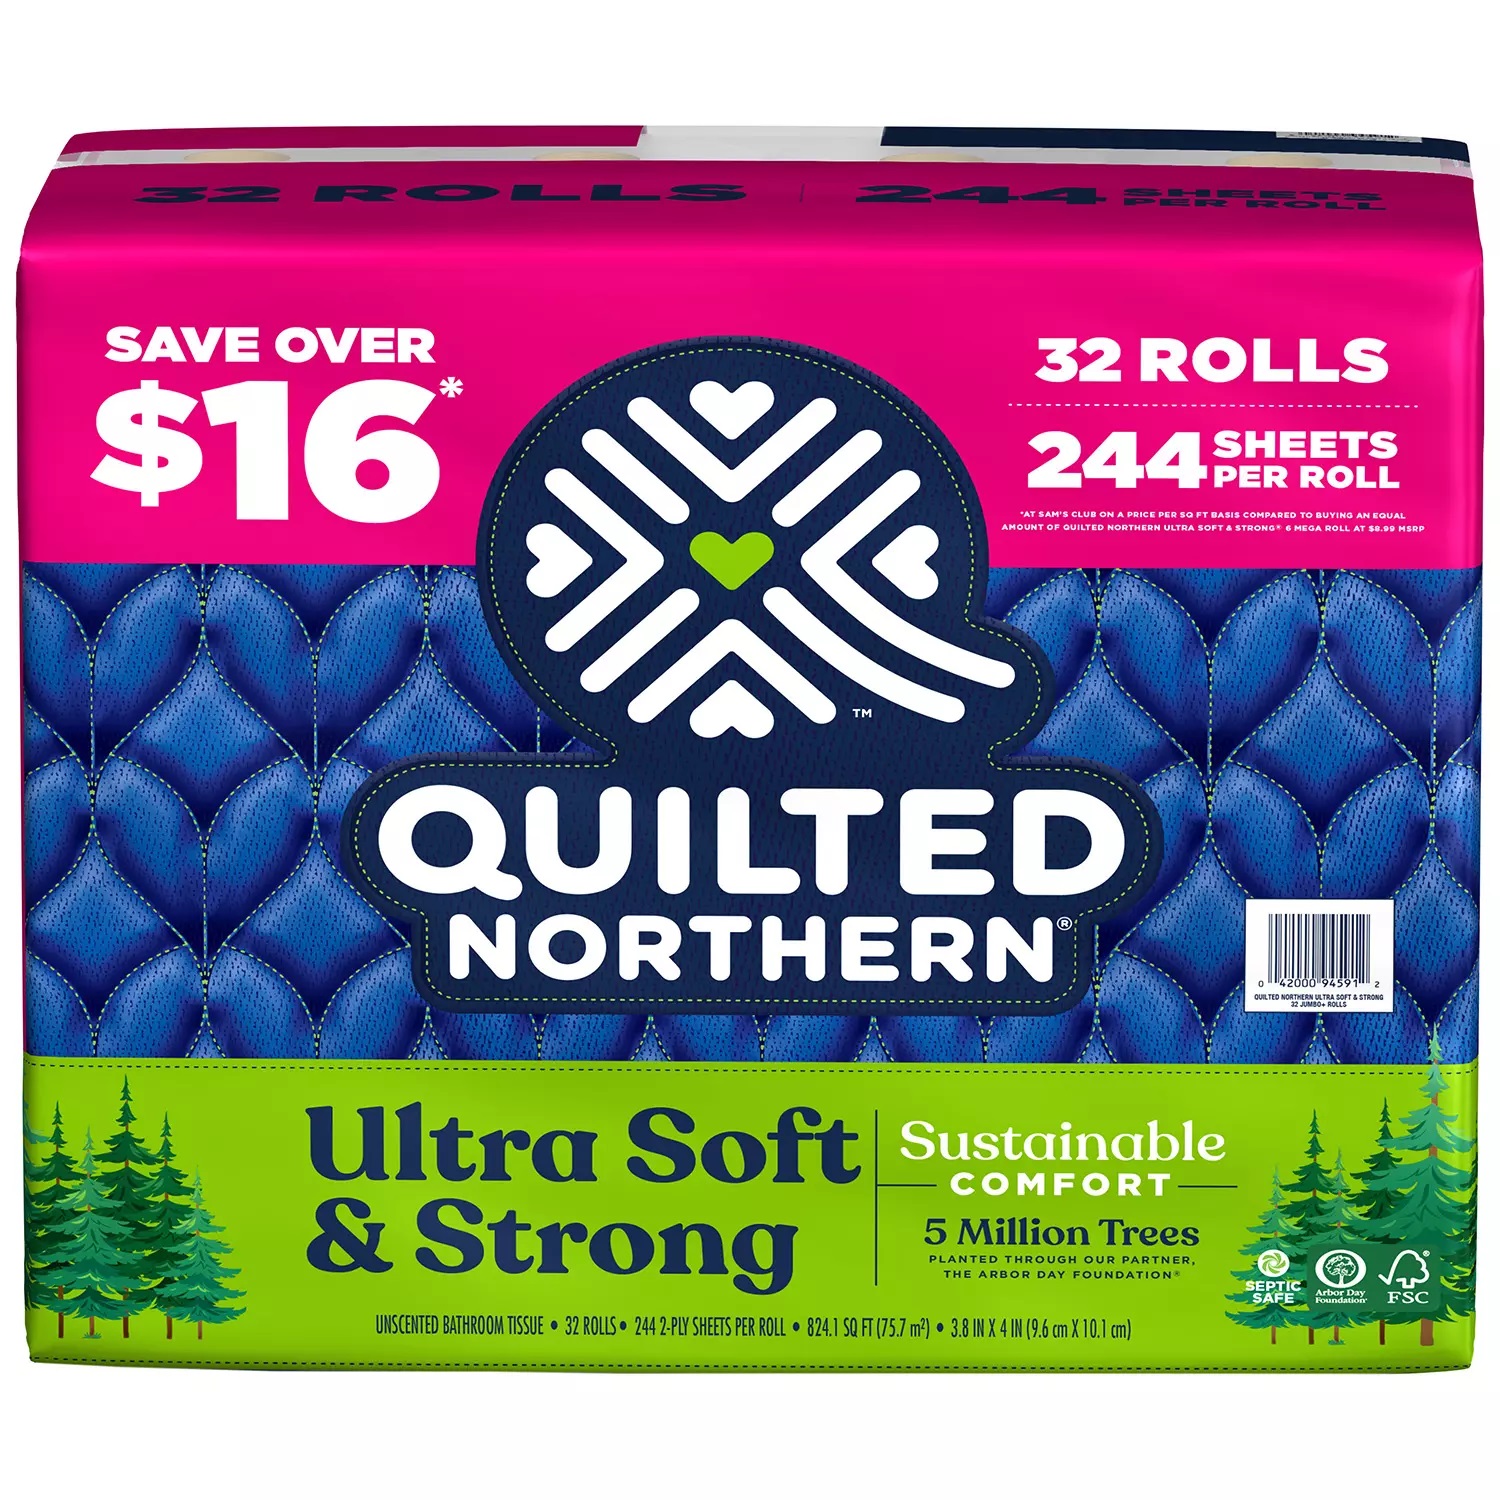 Quilted Northern Ultra Soft & Strong Toilet Paper (244 Sheets/Roll, 32 Rolls)